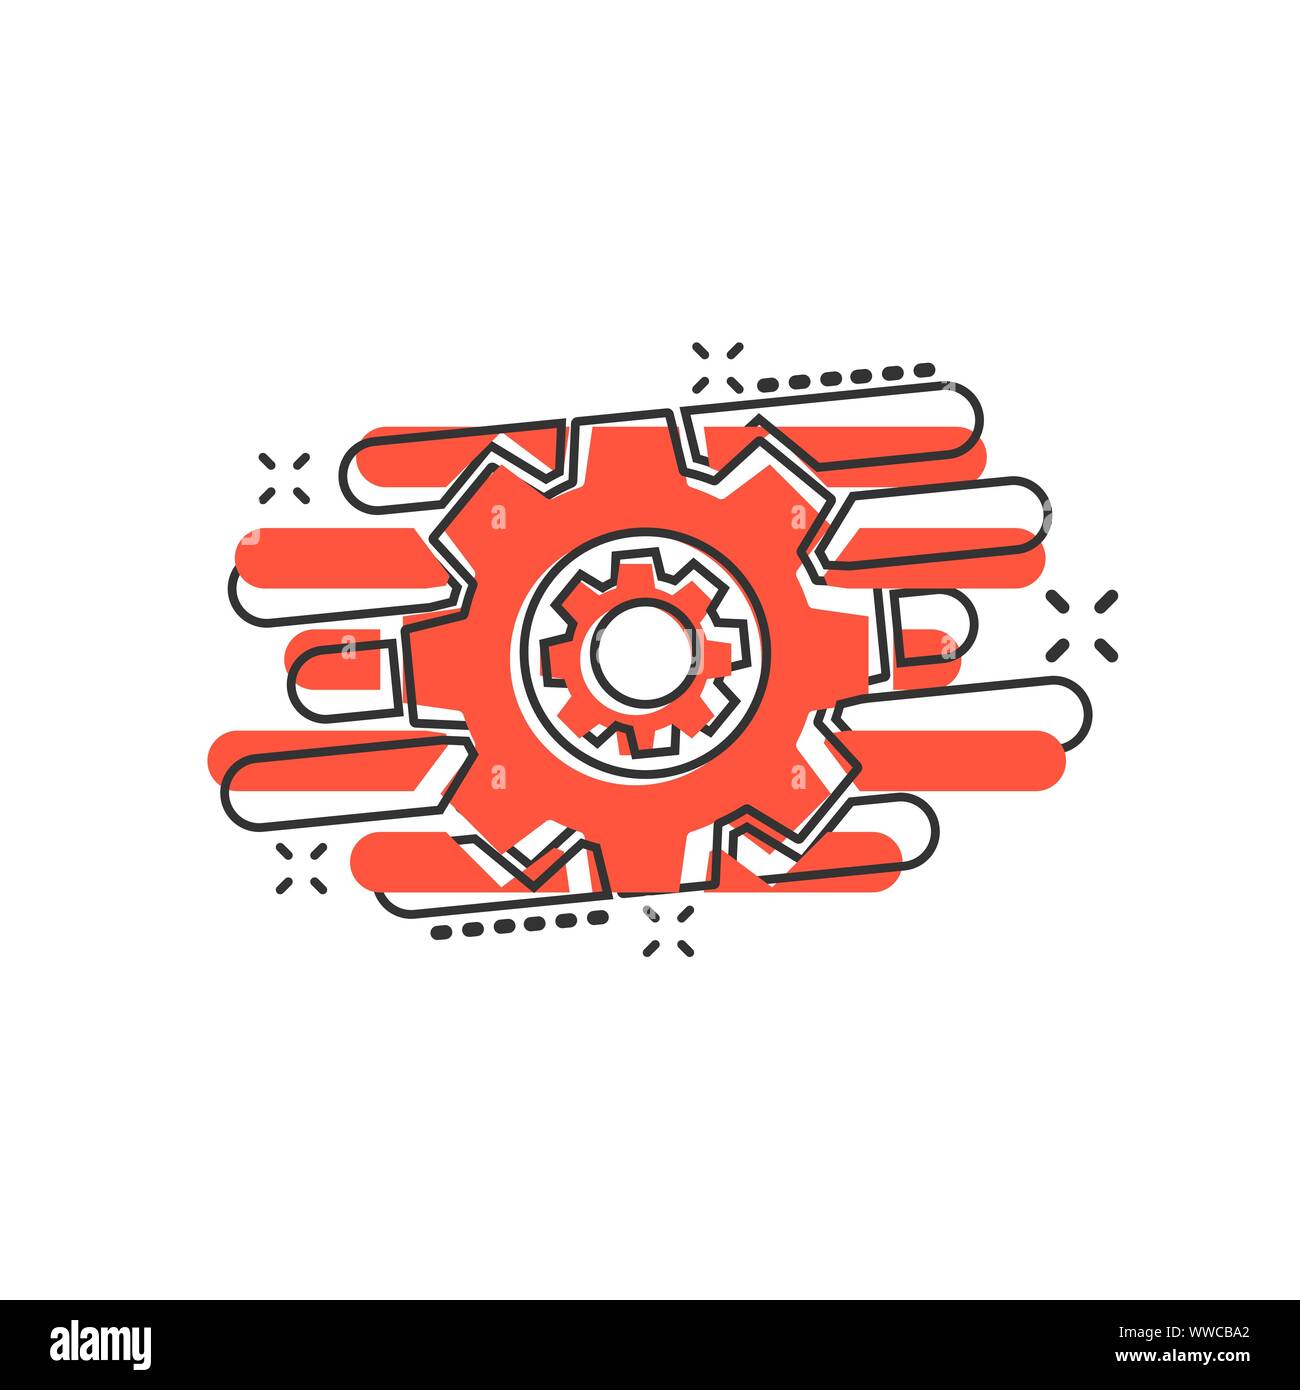 Operation project icon in comic style. Gear process vector cartoon illustration on white isolated background. Technology produce business concept spla Stock Vector